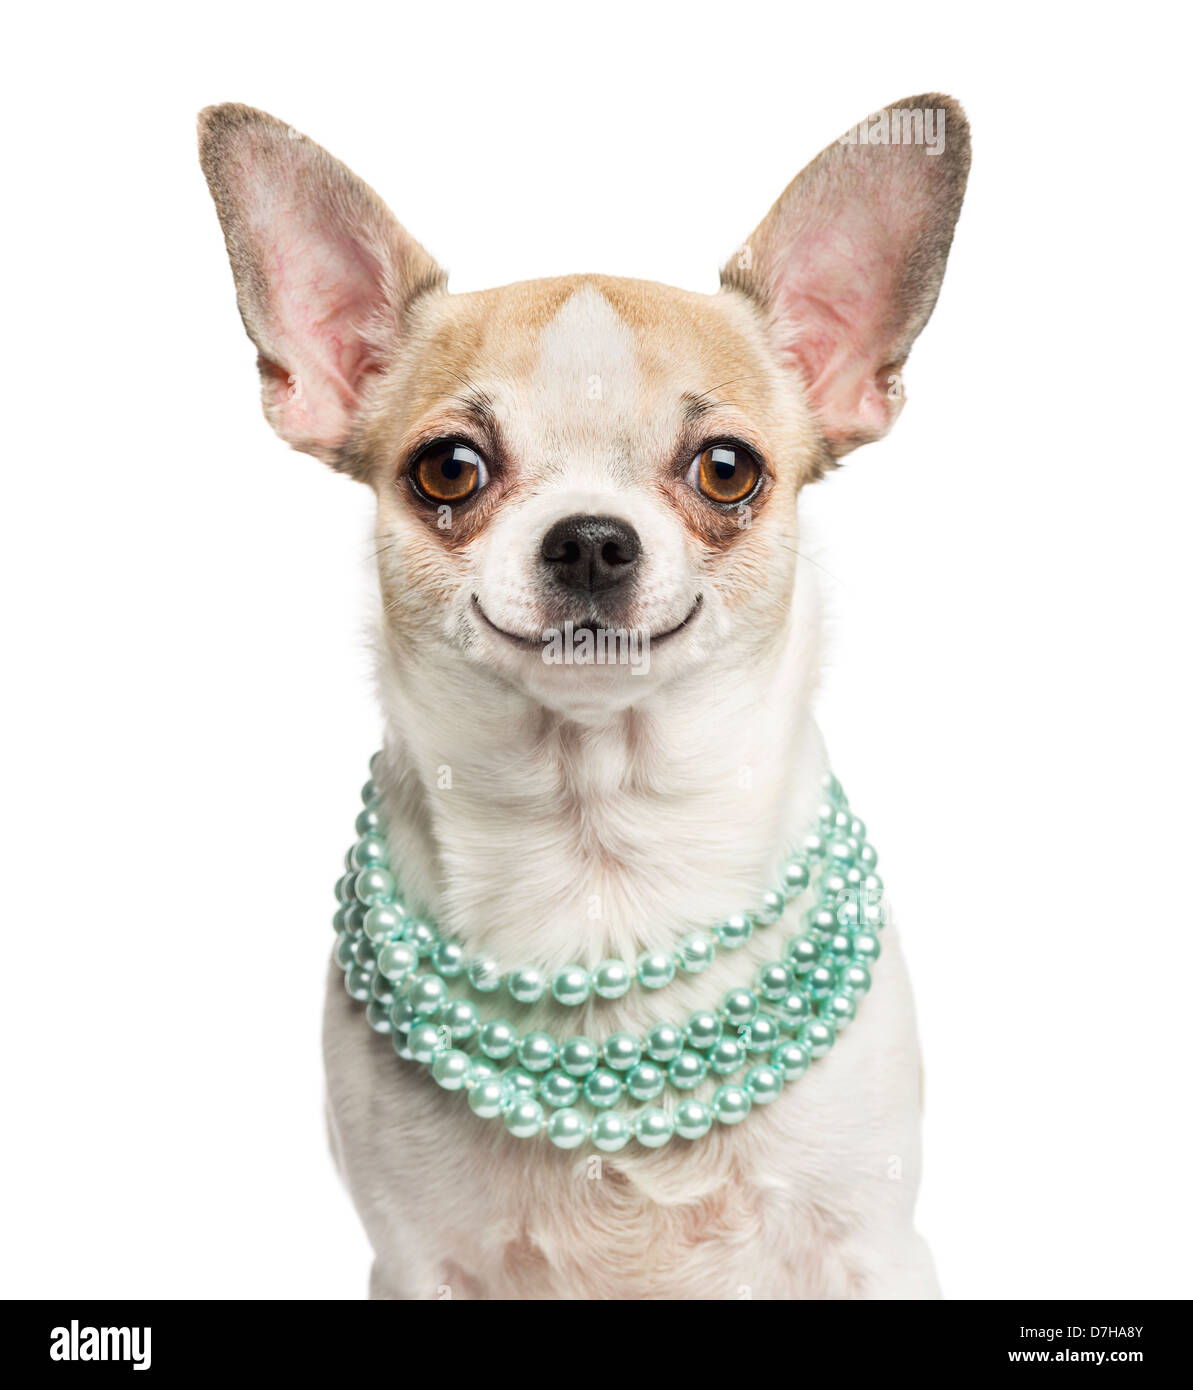 Close-up of a smiling Chihuahua, 2 years old, wearing a pearl necklace against white background Stock Photo